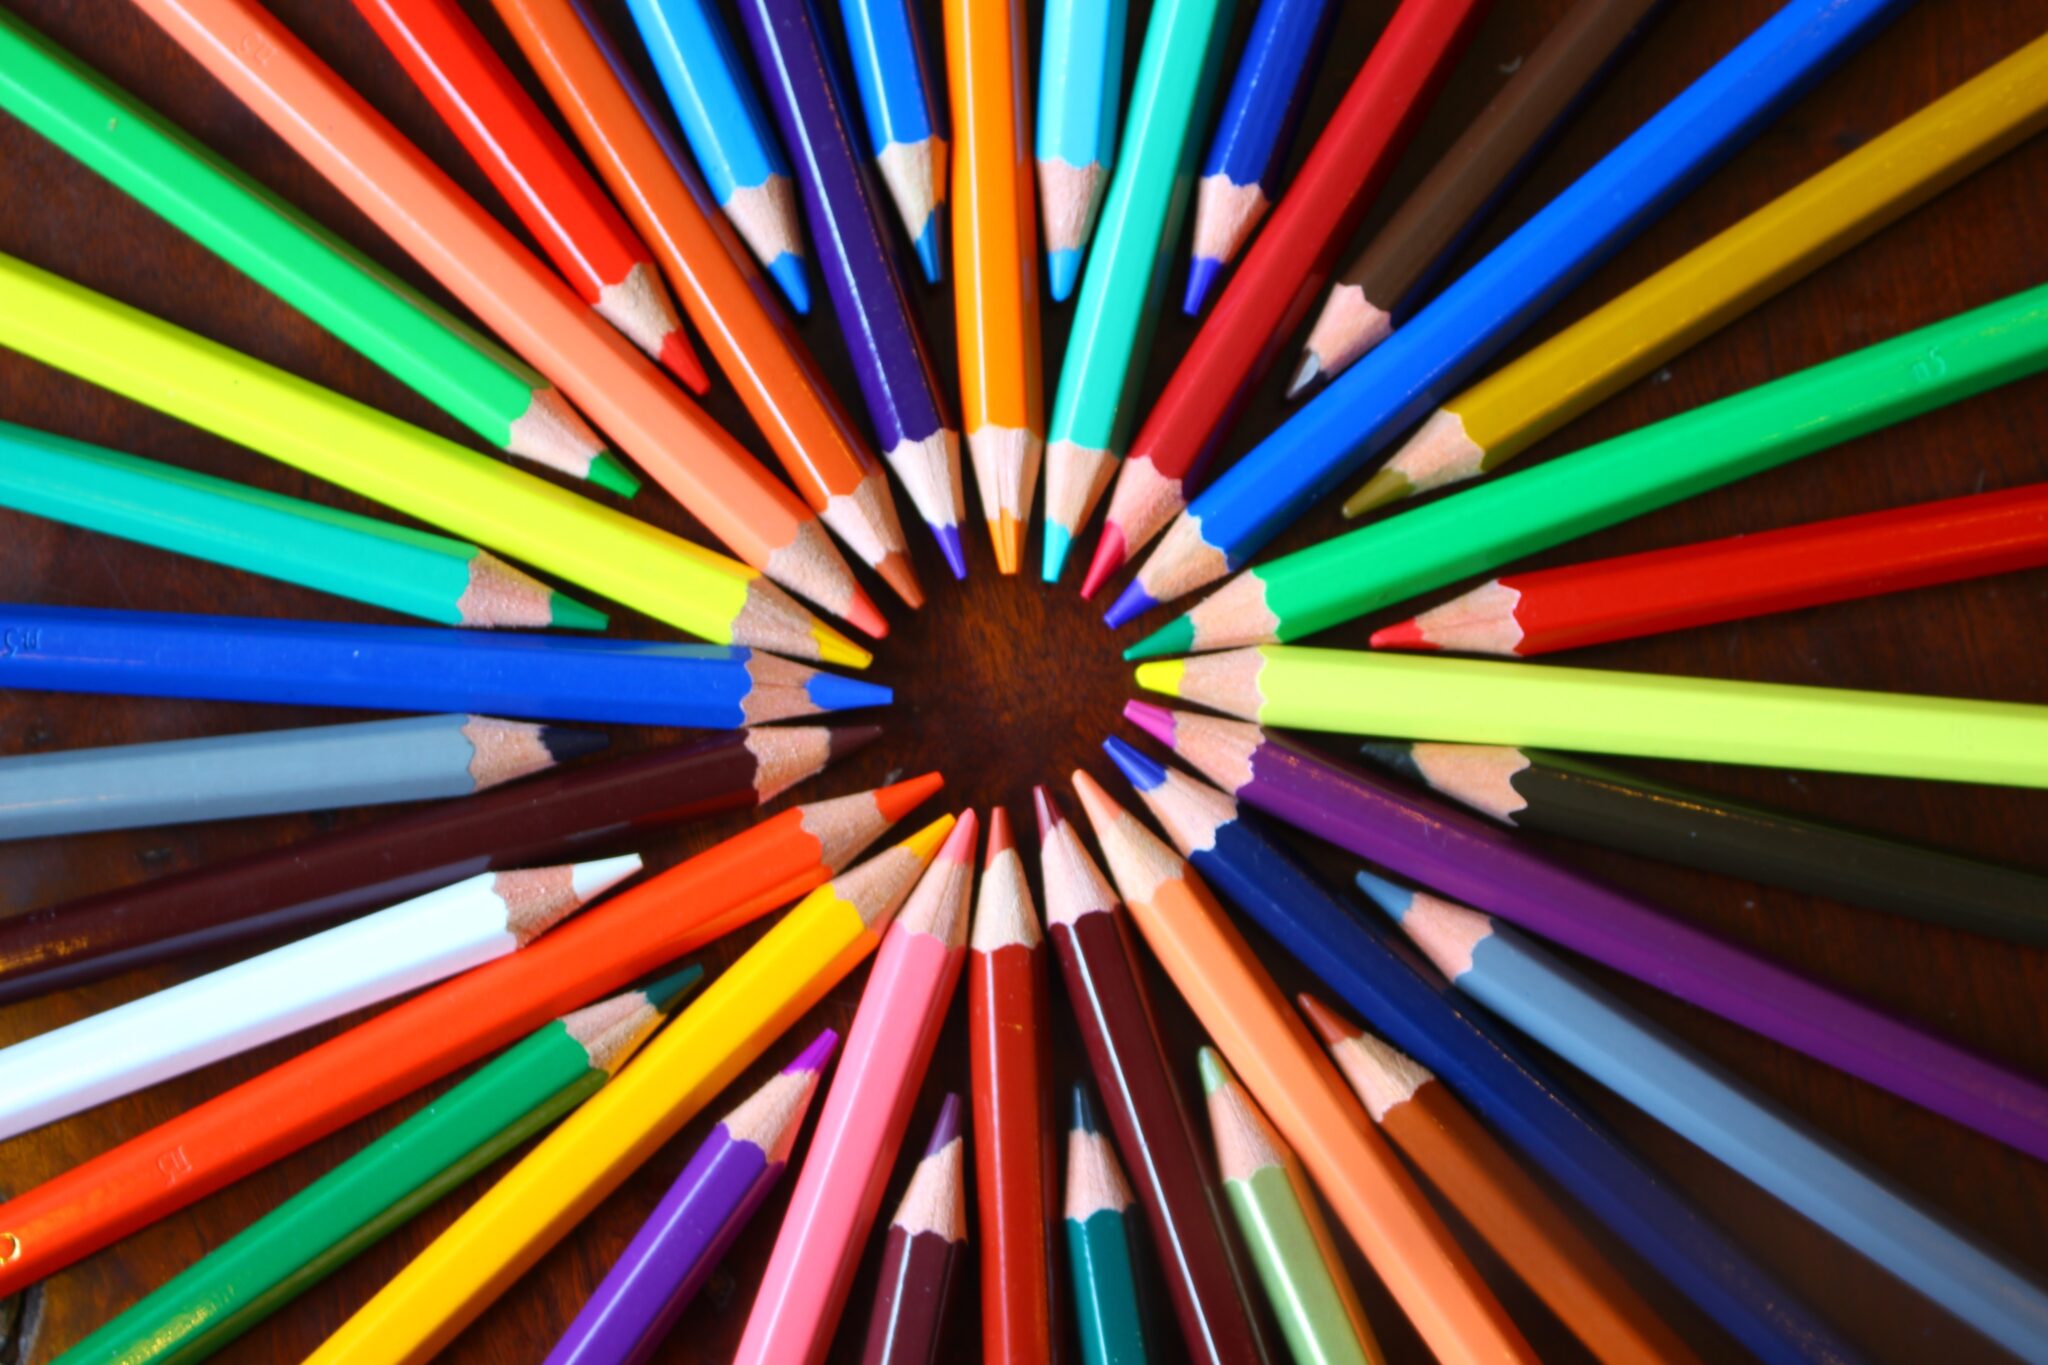 A colourful display of pencil crayons